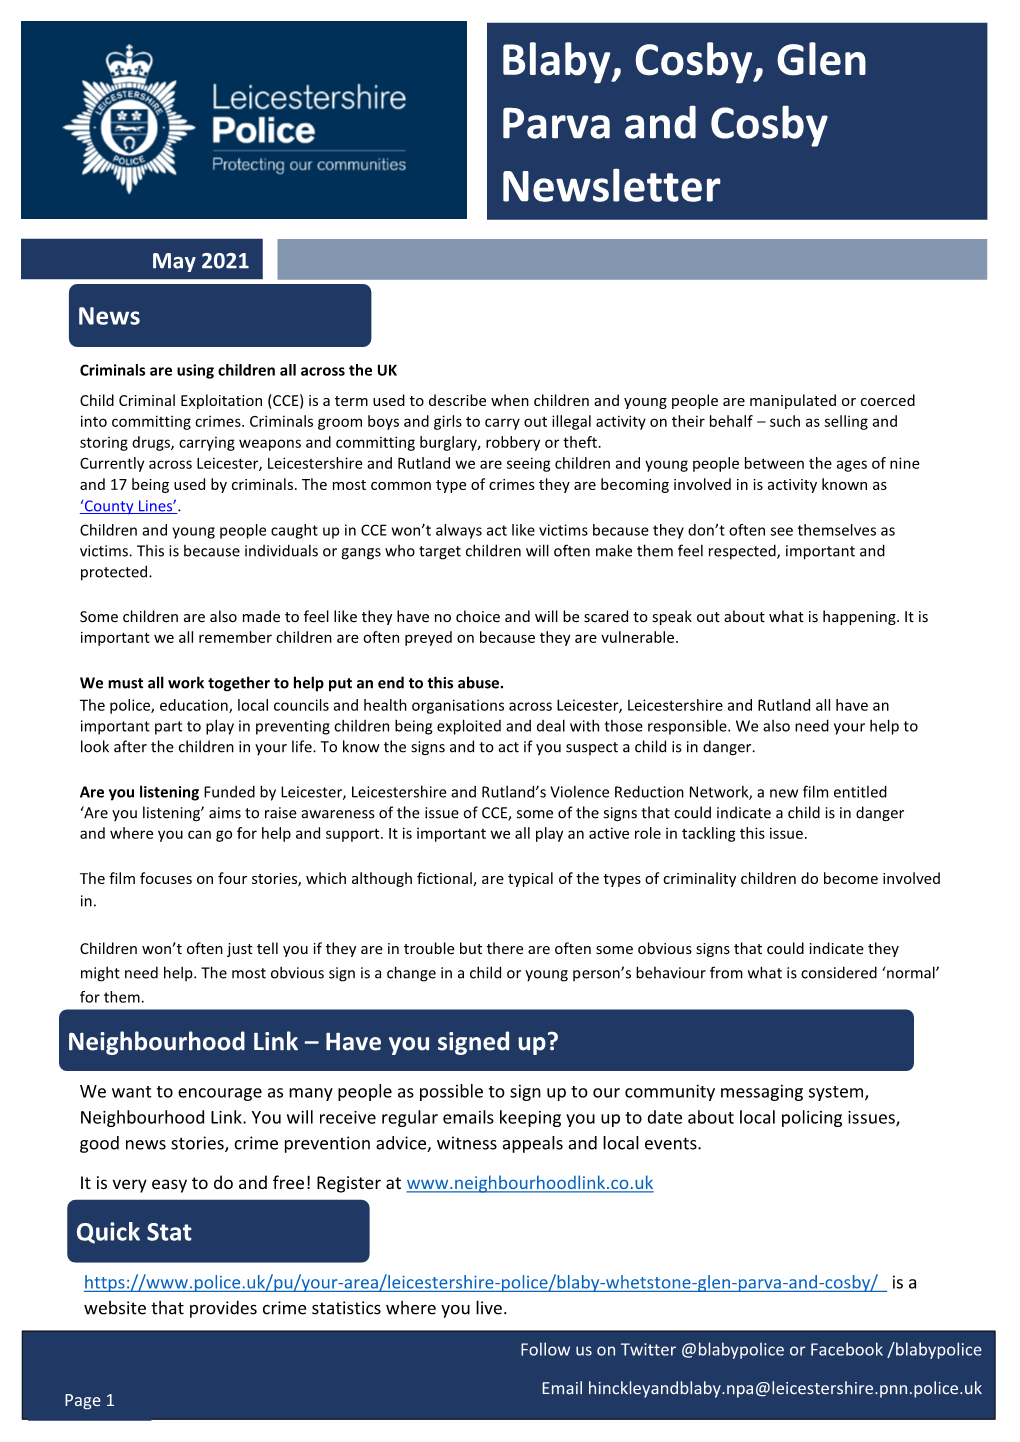 Police-Newsletter-May-2021.Pdf